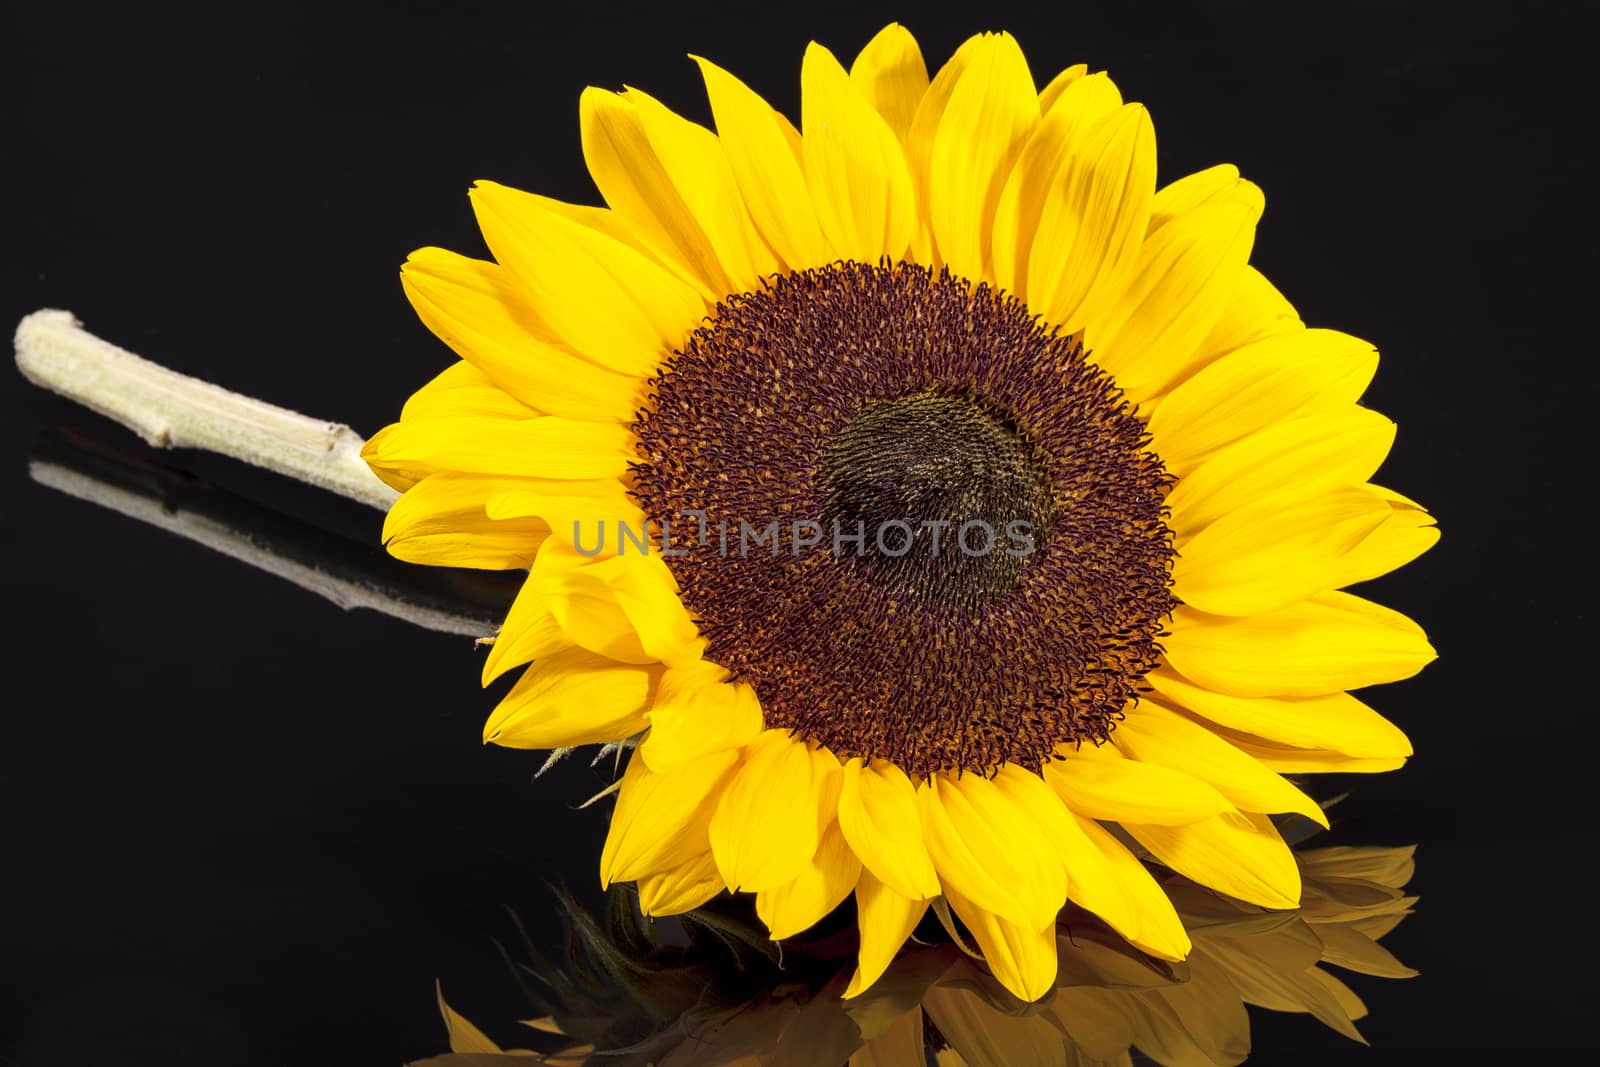 Single head of blooming sunflower isolated on black background by mychadre77